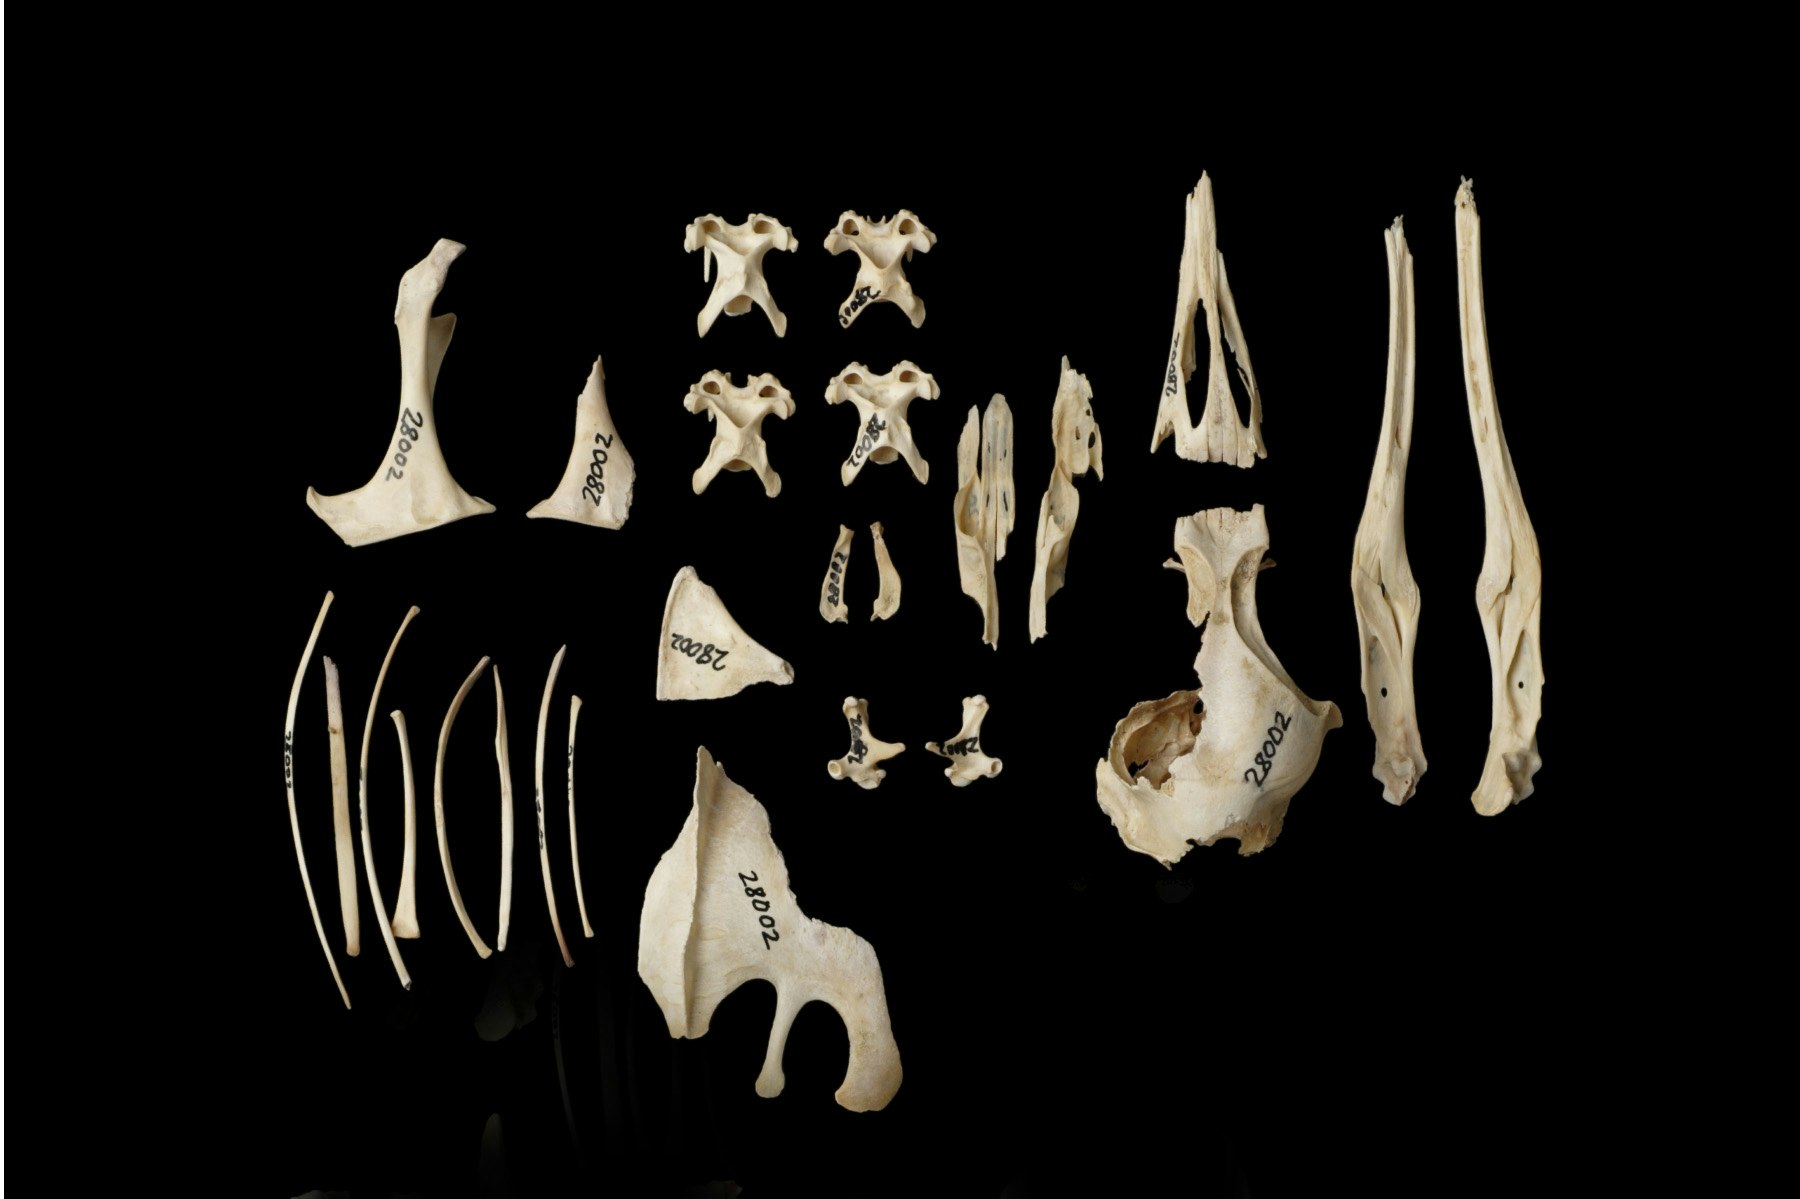 A selection of fine bones laid out on a black cloth